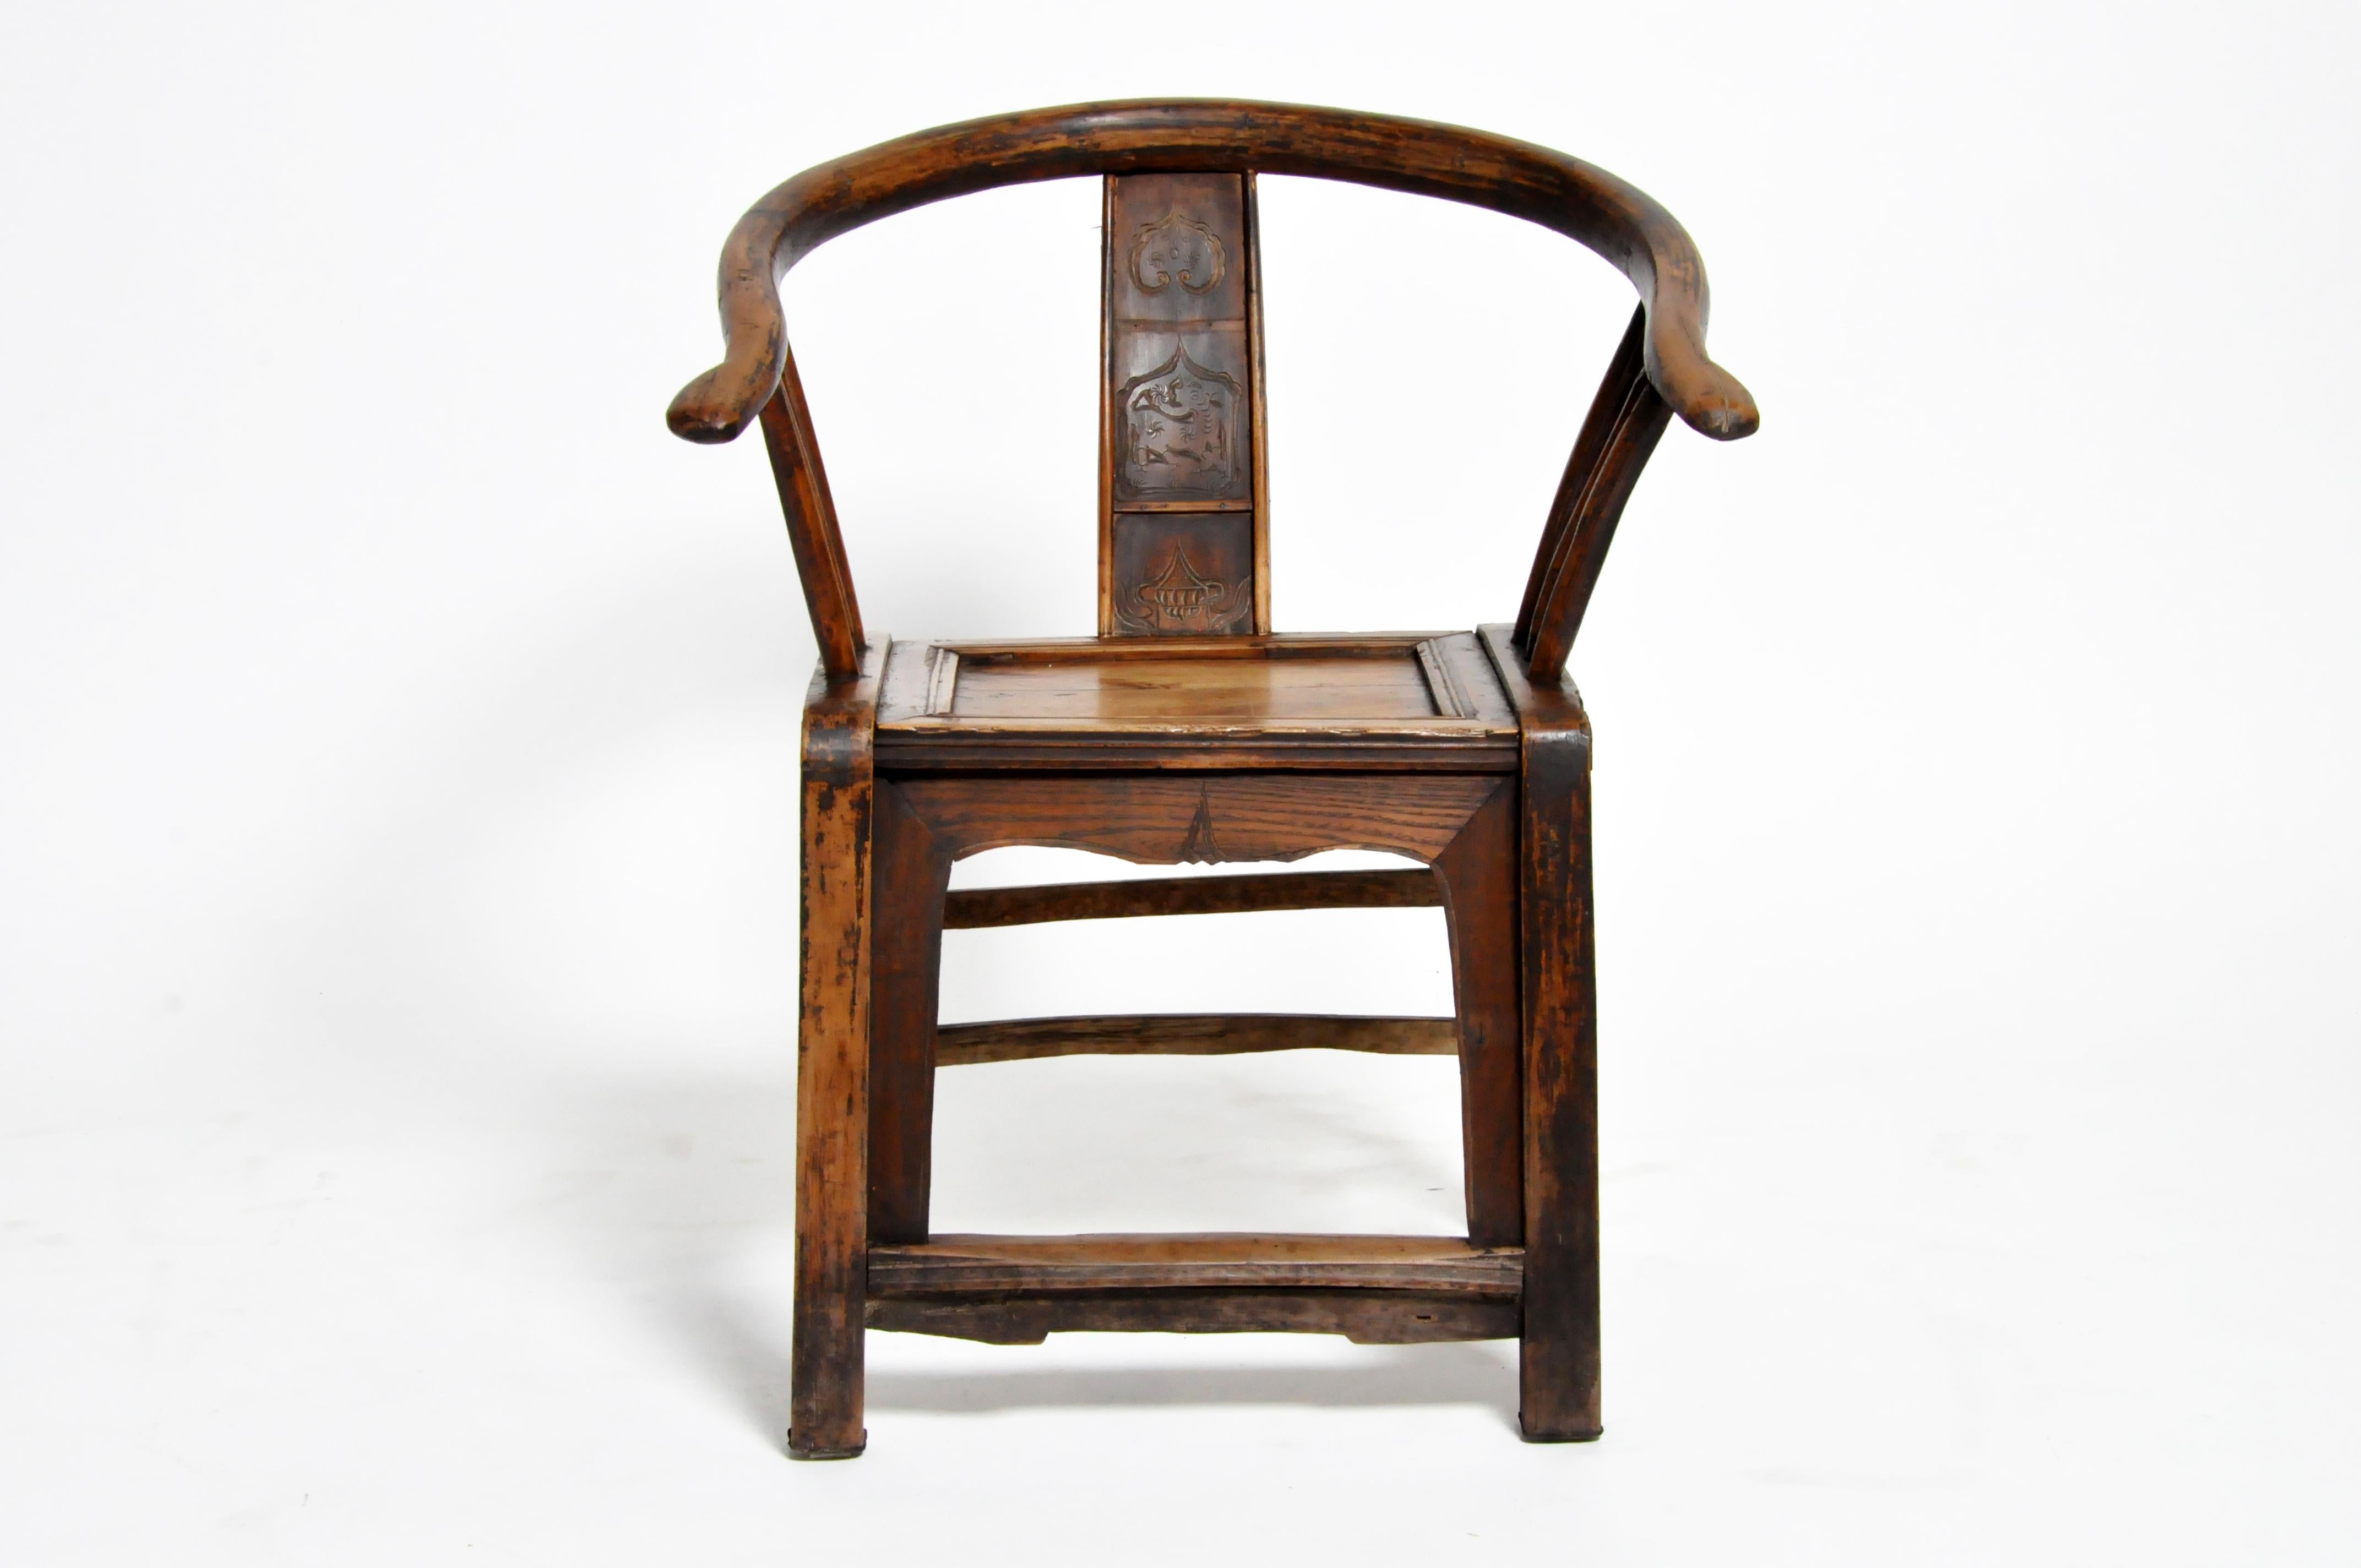 This late Qing dynasty pair of round back chairs are from Shandong, China and were made from 